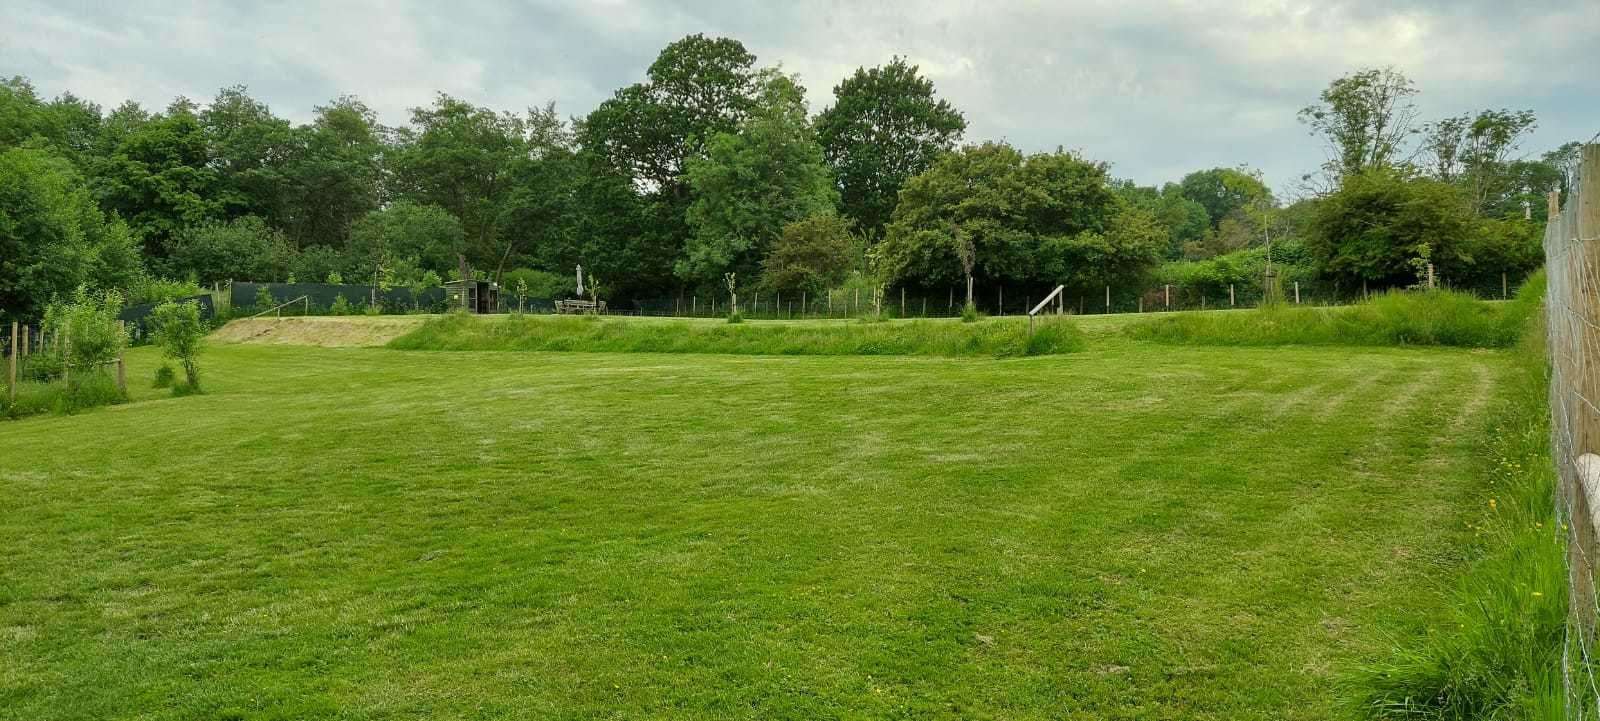 S&S Doggie Field in Folkestone has been granted planning permission. All pictures: S&S Doggie Field